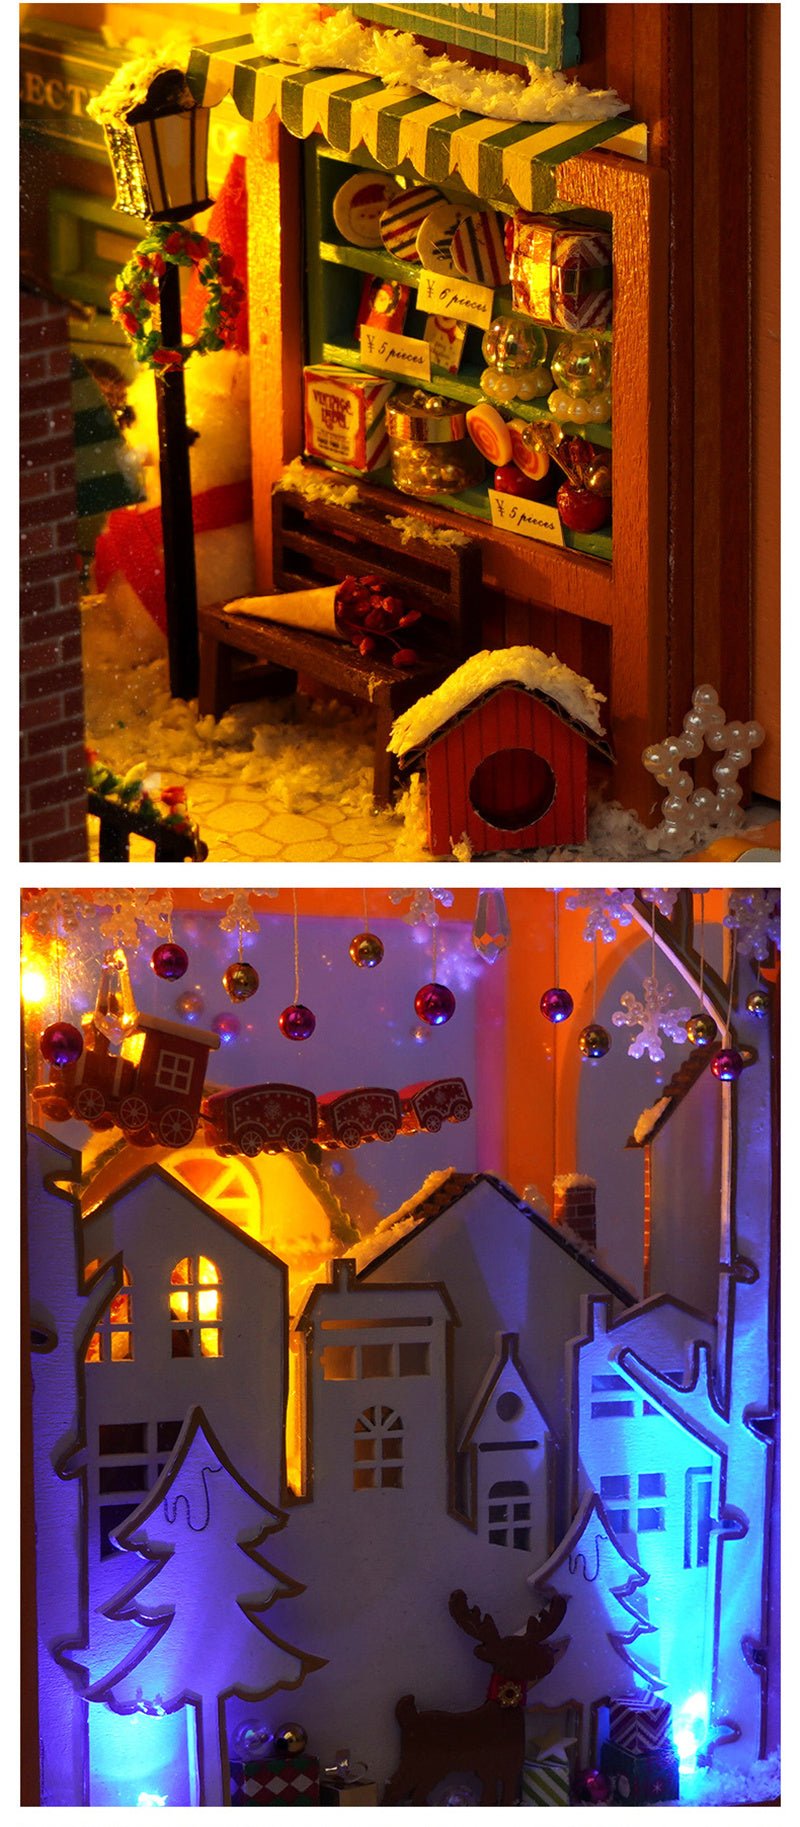 Christmas Ornaments DIY Christmas Book Nook Kit with LED Lights 3D Creative  Home Decor Bookshelf Ornaments – the best products in the Joom Geek online  store